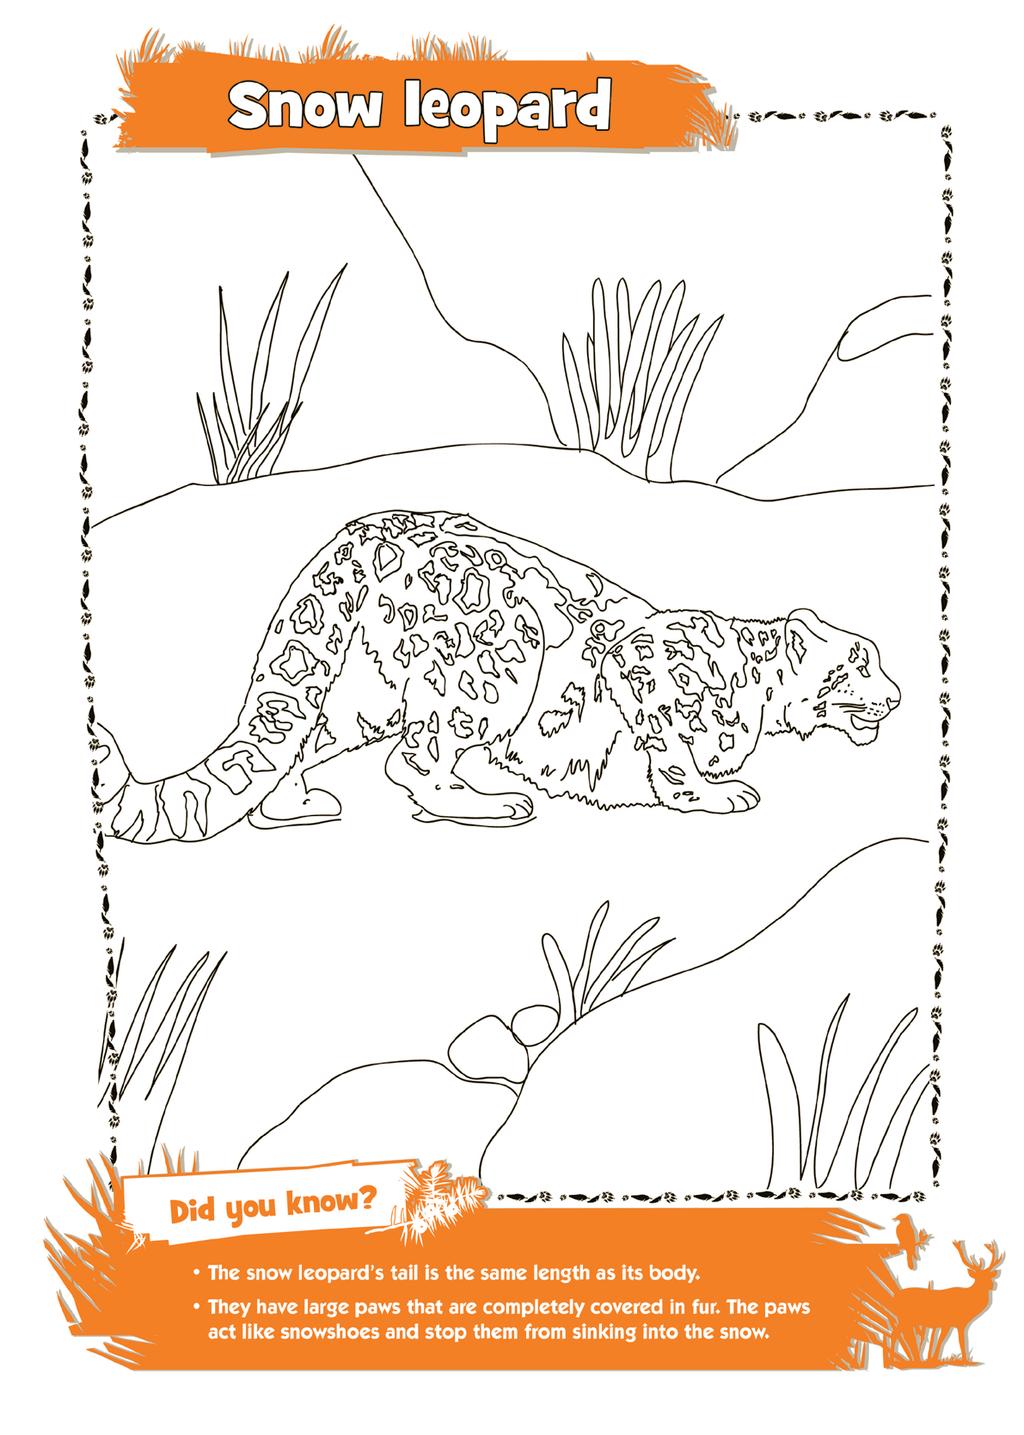 For more colouring activities, check out